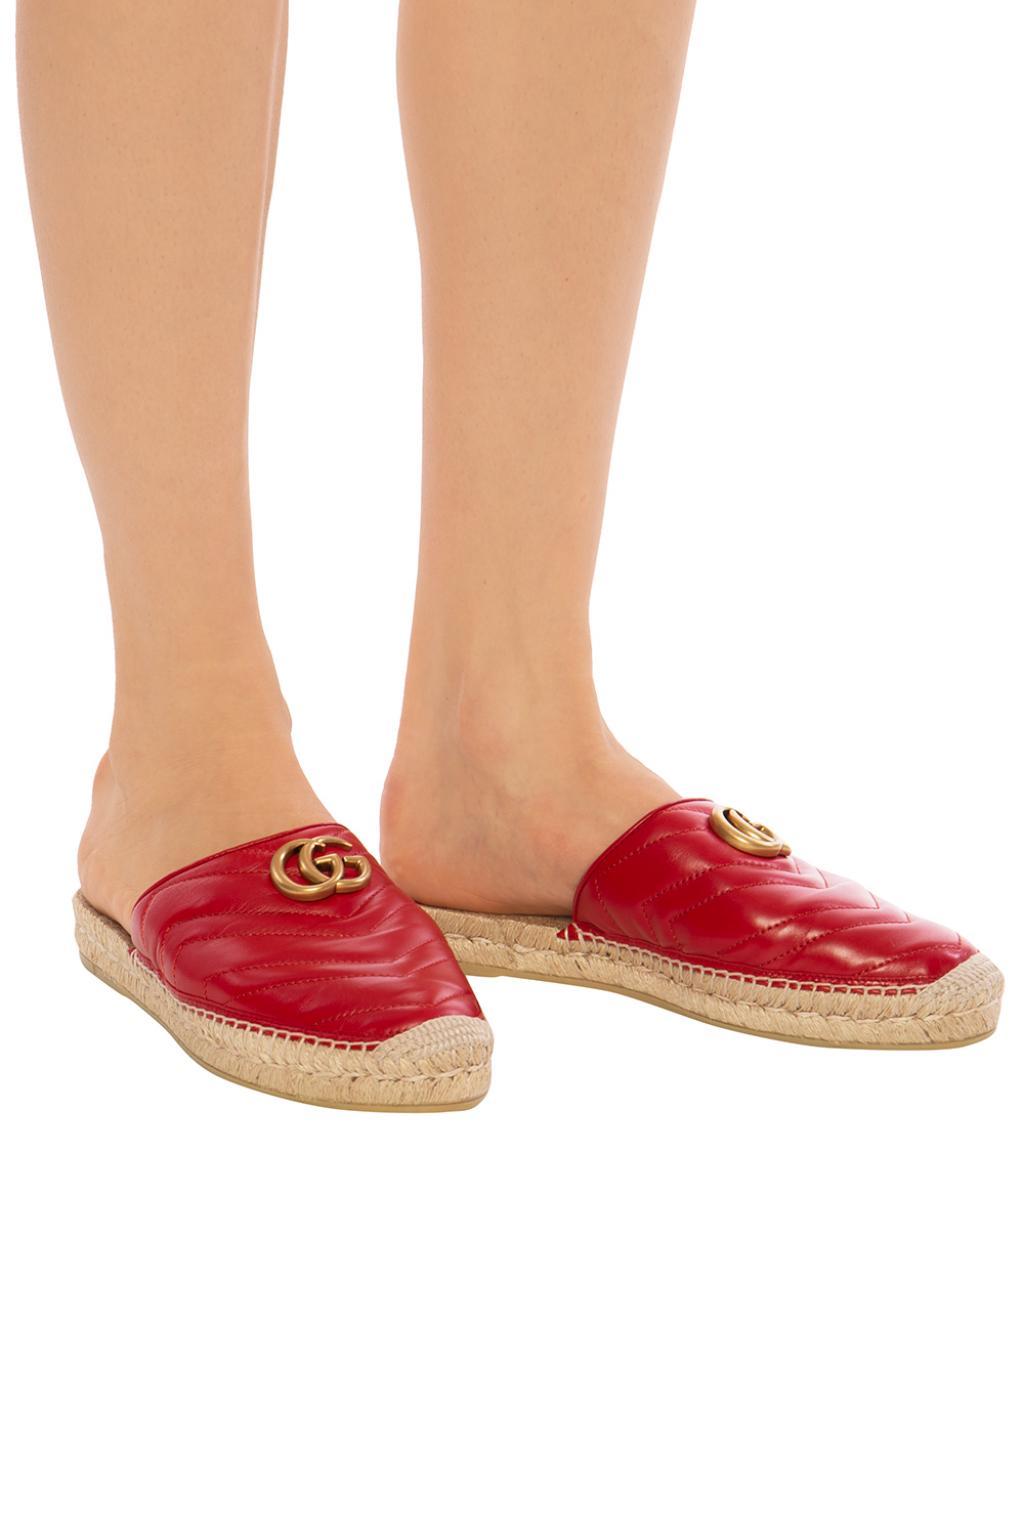 gucci red leather espadrilles